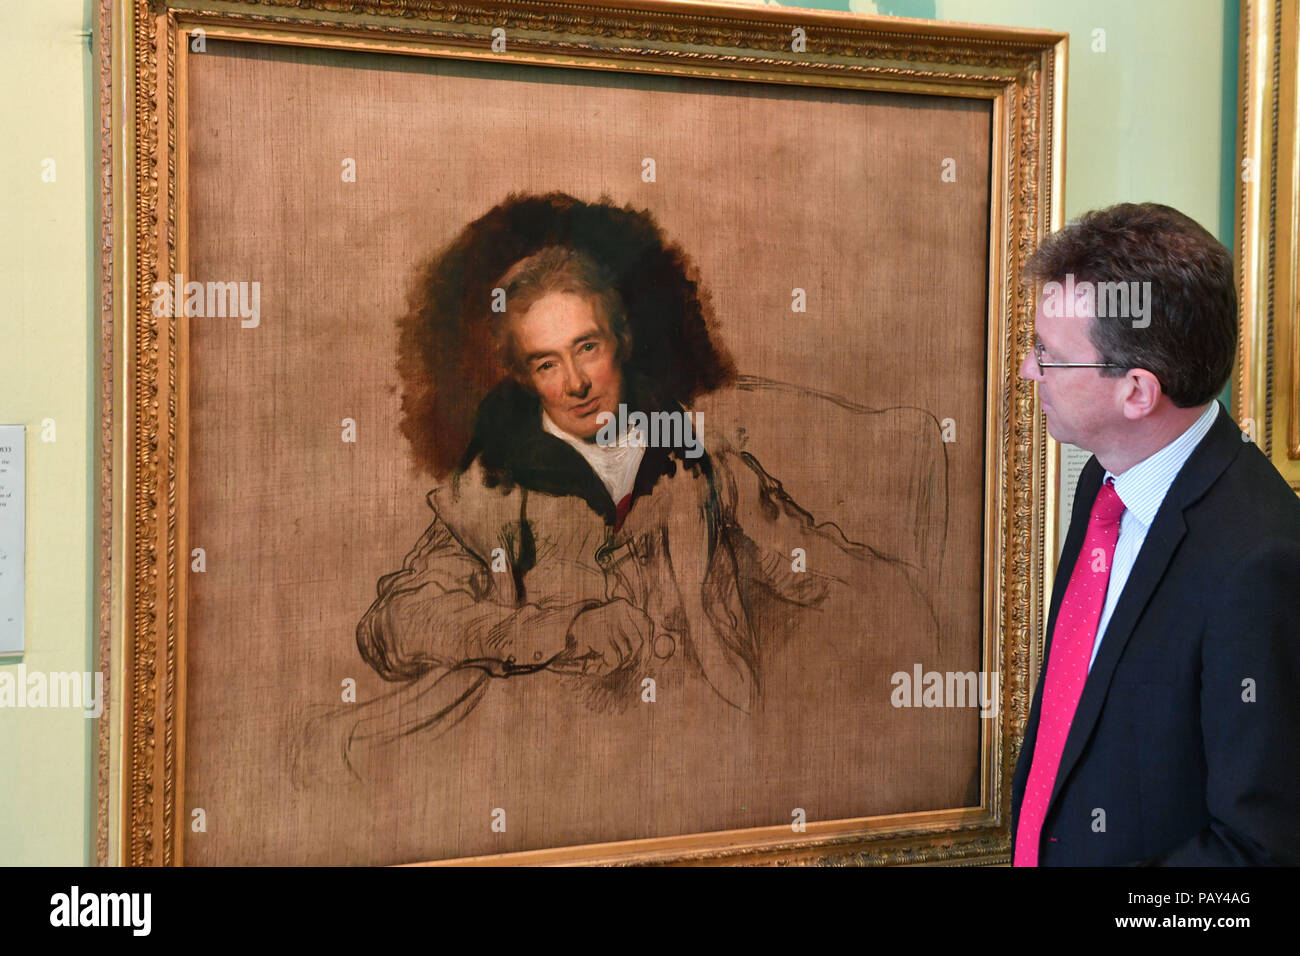 Culture Secretary Jeremy Wright during the launch of new project 'Coming Home' at the National Portrait Gallery in London, which will see Sir Thomas Lawrence's portrait of prominent anti-slavery activist William Wilberforce exhibited in his home city of Hull for the first time. Stock Photo